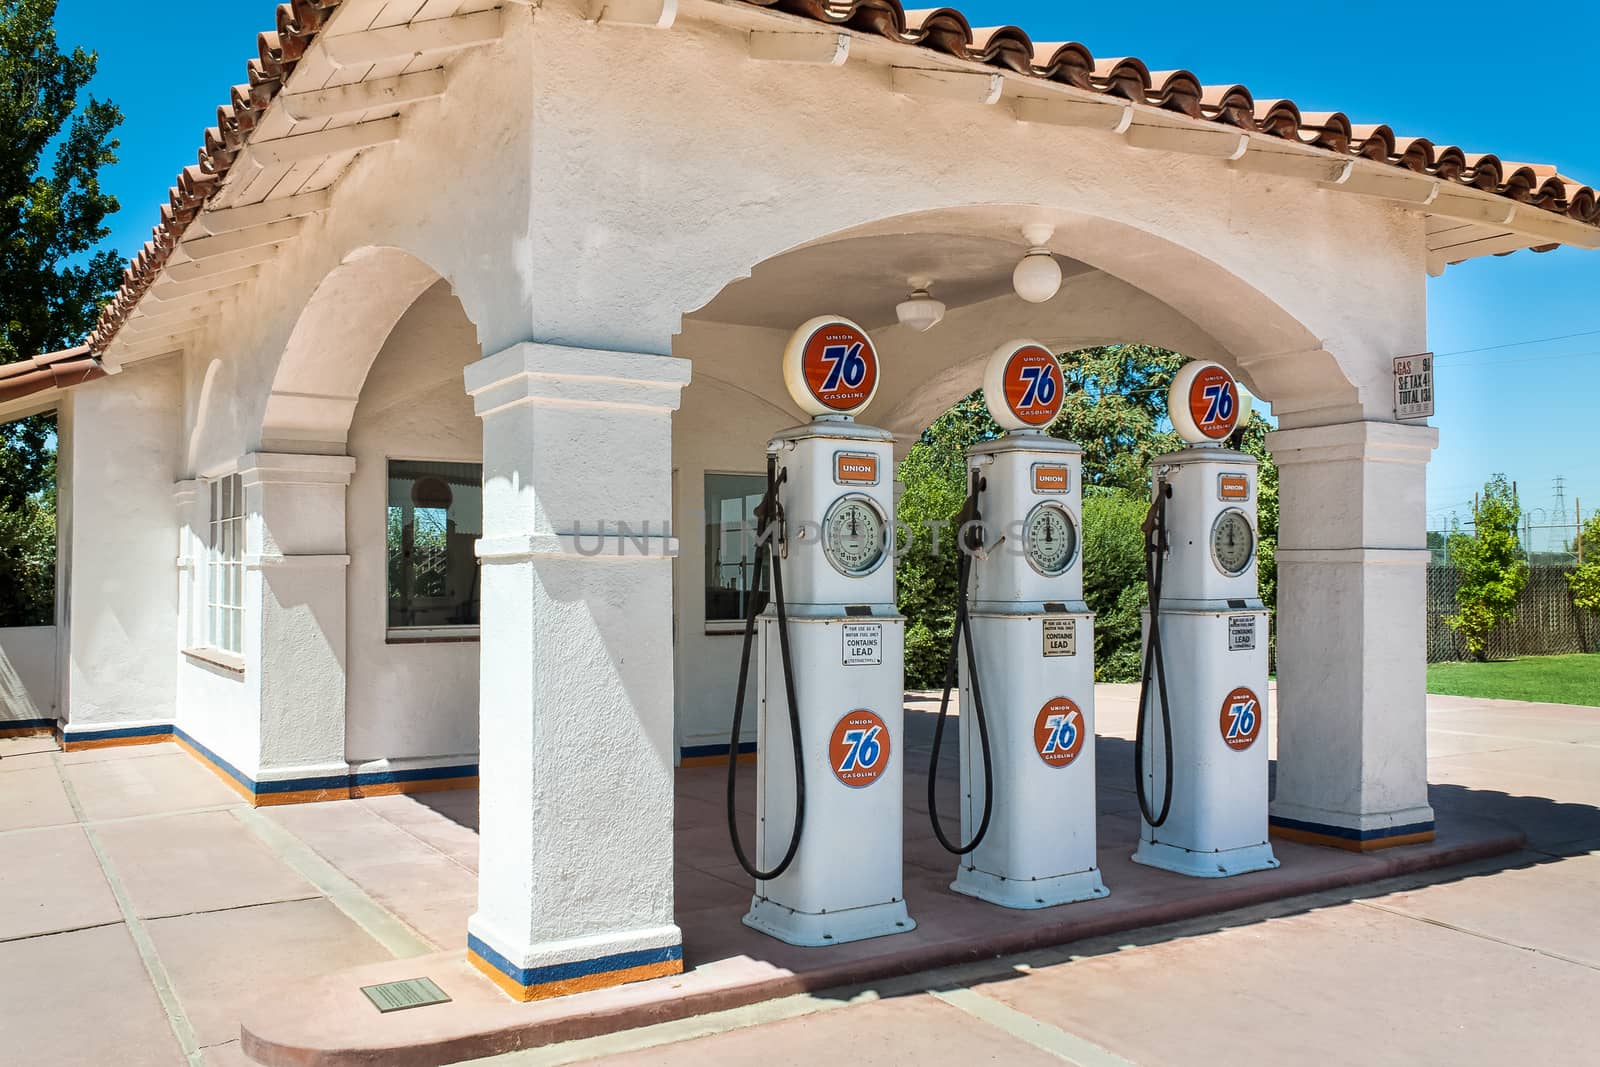 Vintage Union 76 Gas Station in the United States by wolterk